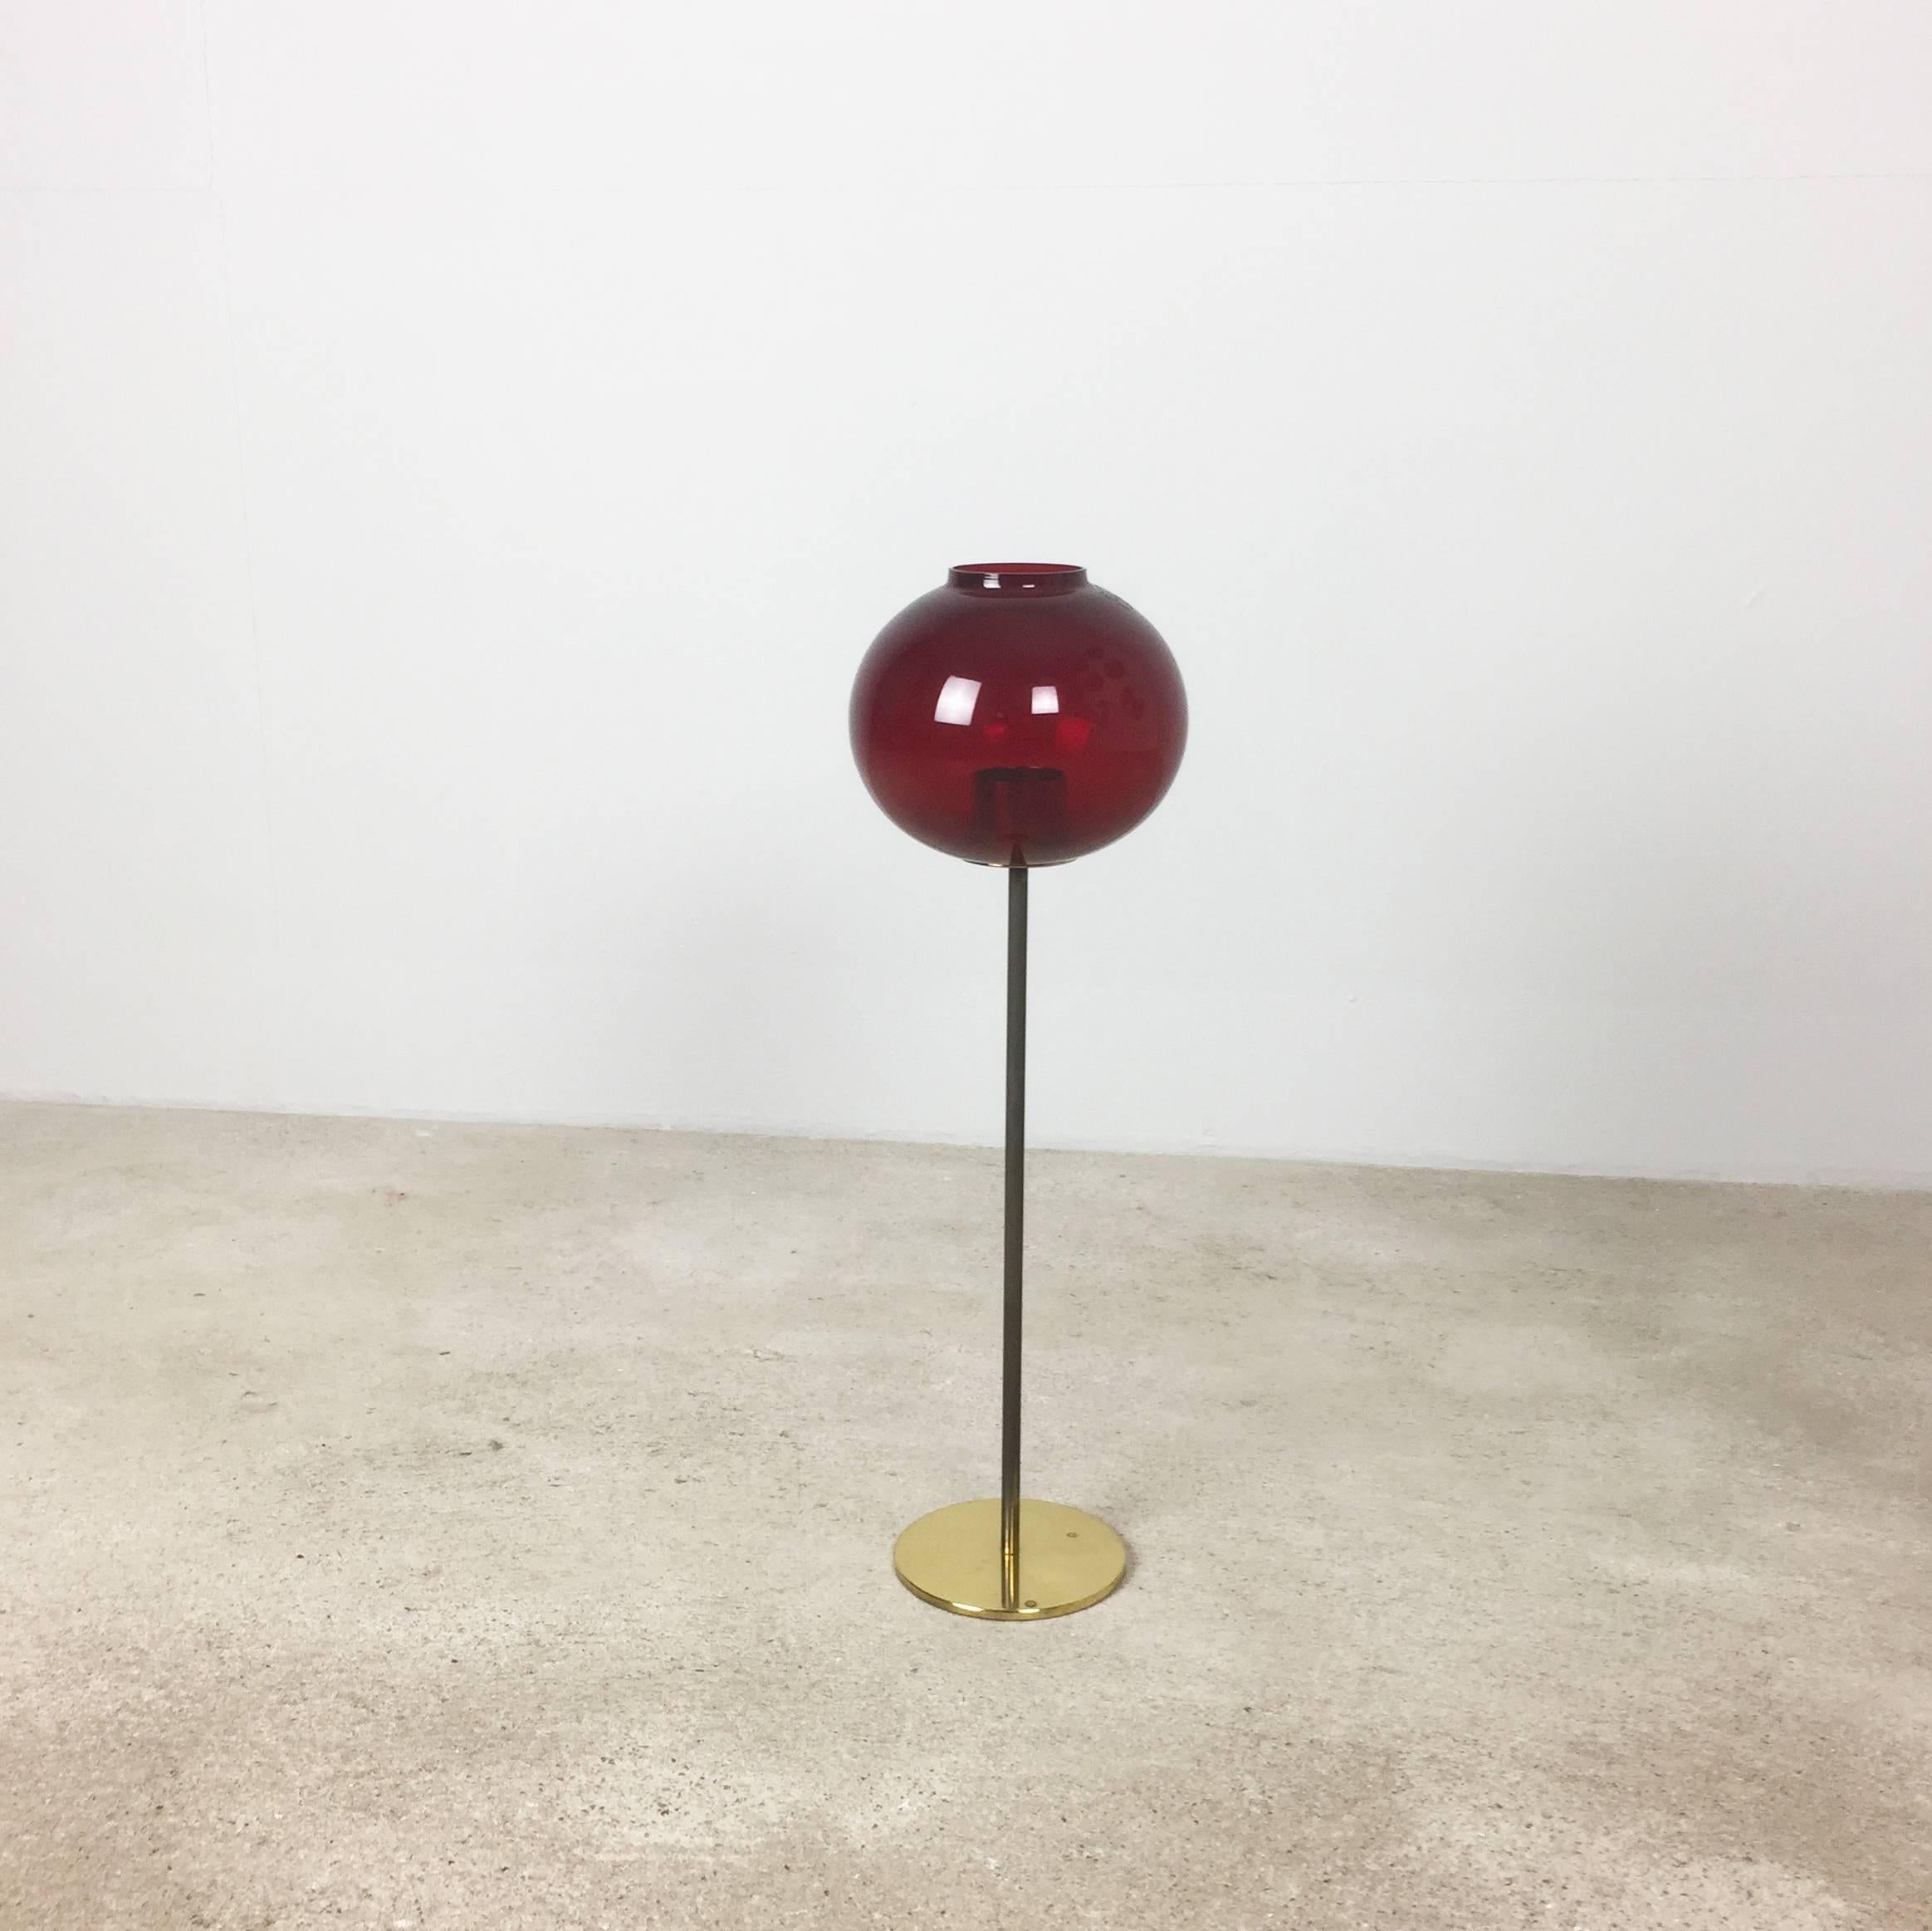 Article:

candleholder element with super rare dark light red shade

Design:

Hans Agne Jakobsson

Producer:

Hans Agne Jakobsson ab, Sweden

Description:

This candlelight holder was designed by Hans Agne Jakobsson in the 1950s and